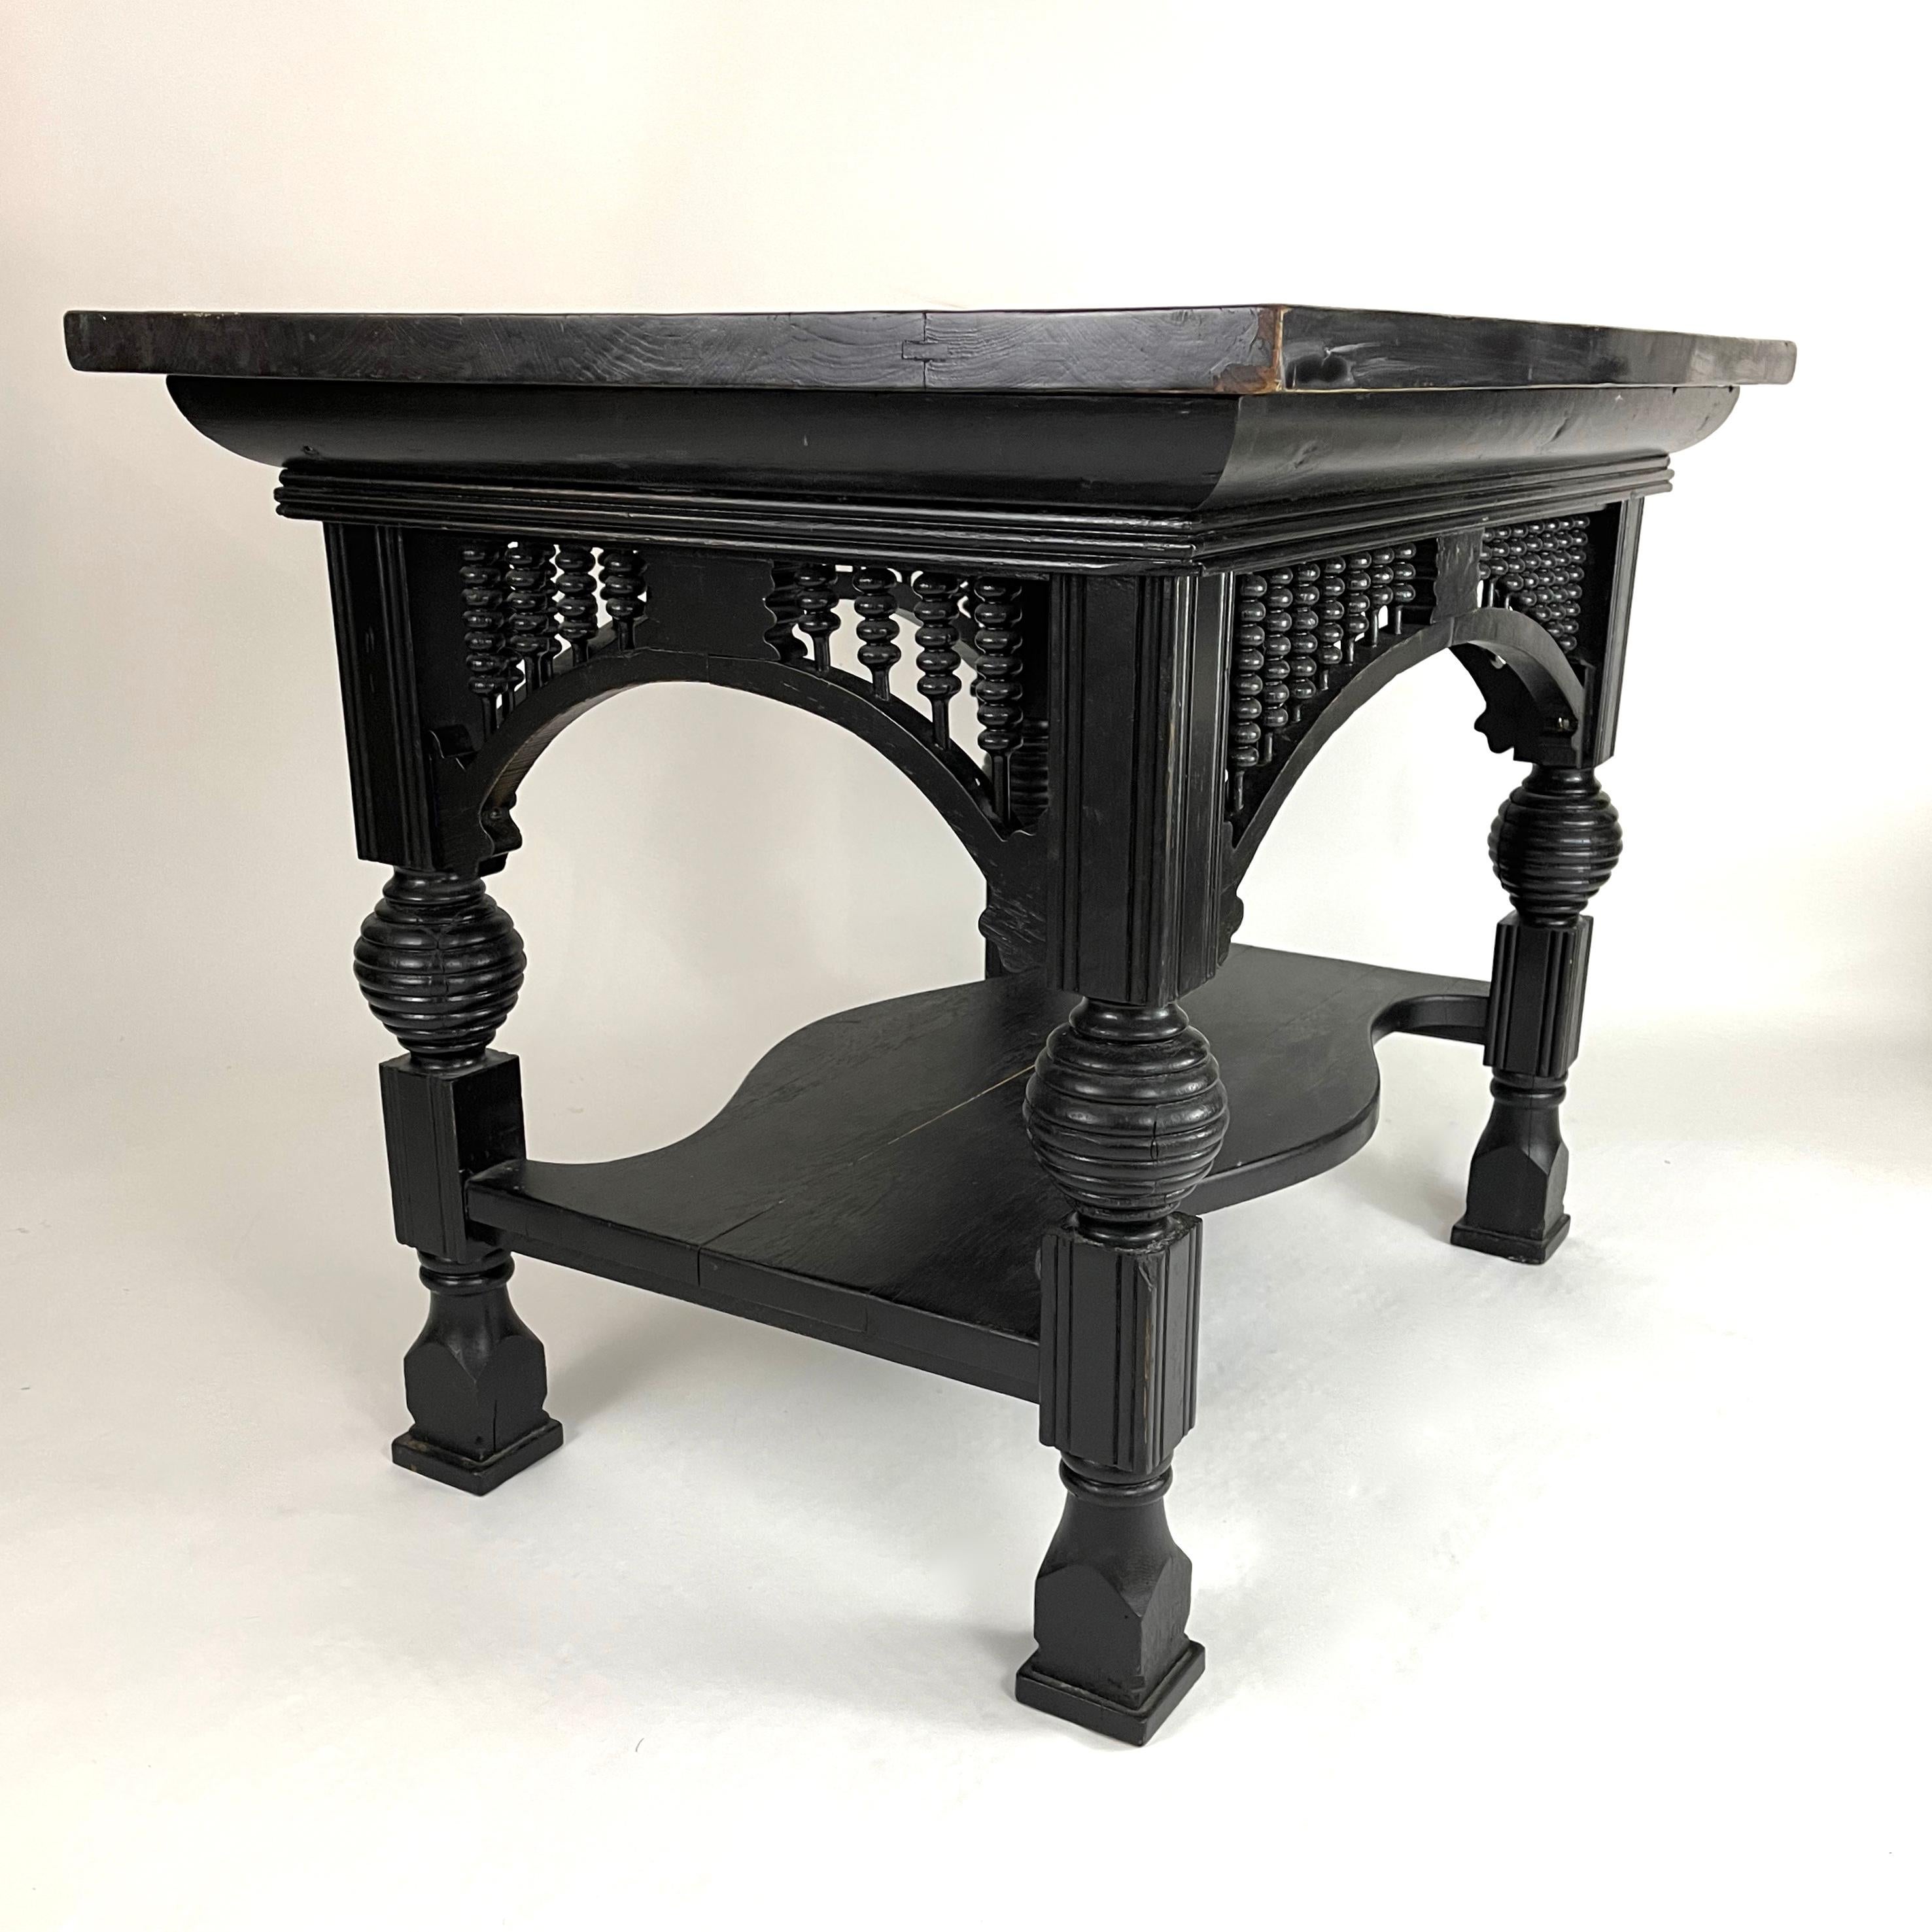 A wonderfully graphic and sculptural 19th century Aesthetic Movement period table, in oak with later black painted surface, the rectangular top over turned spindles joined by arched brackets attached to square section and circular beehive turned